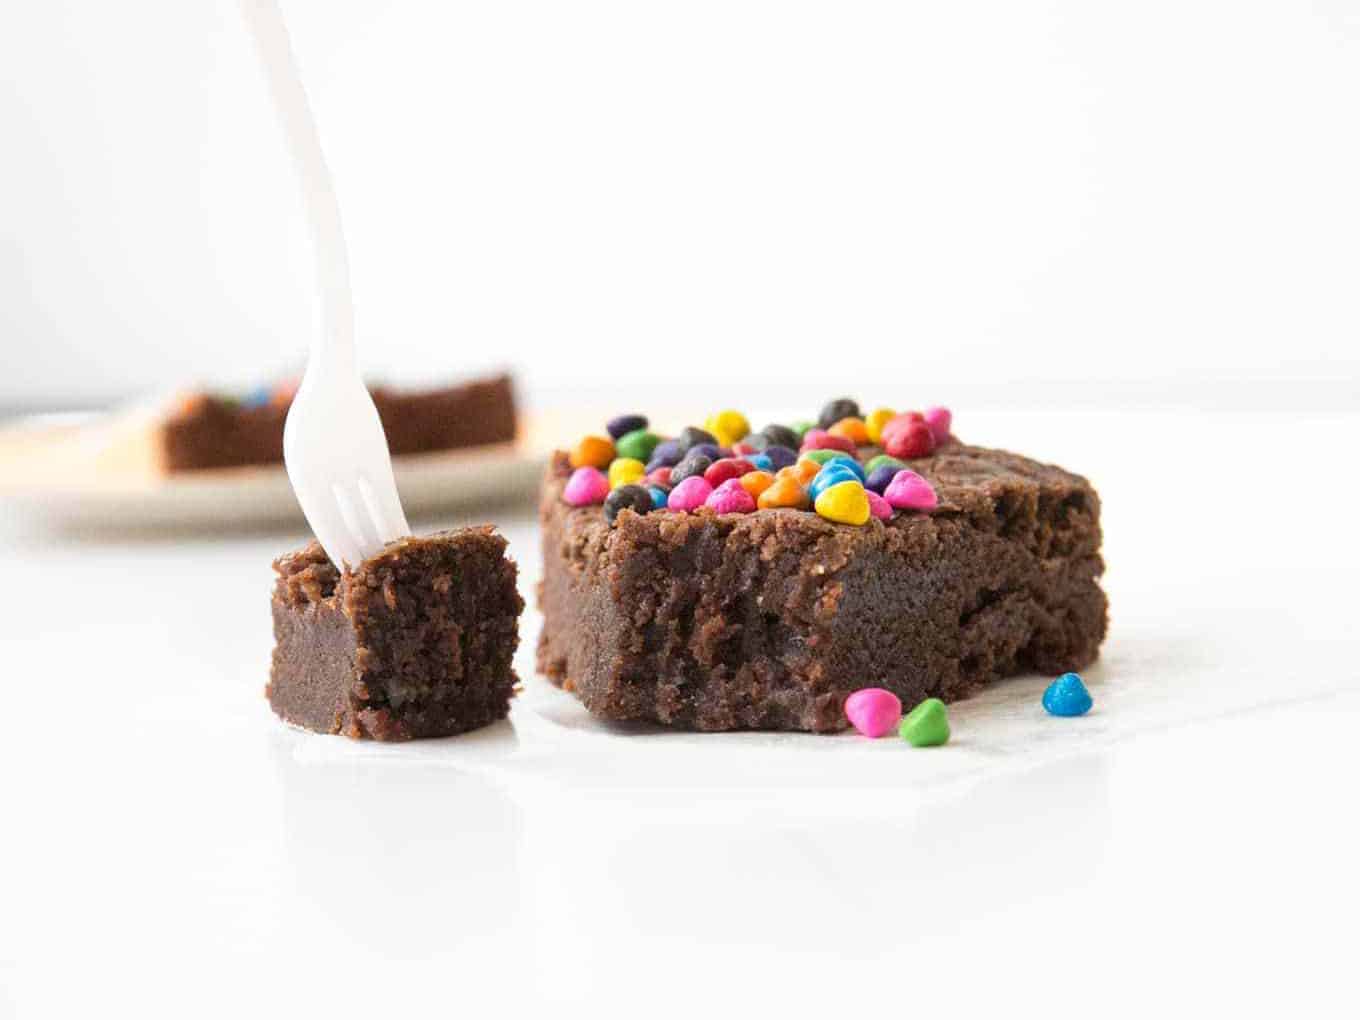 Brownie with rainbow chocolate chips with bite taken out of it with fork.